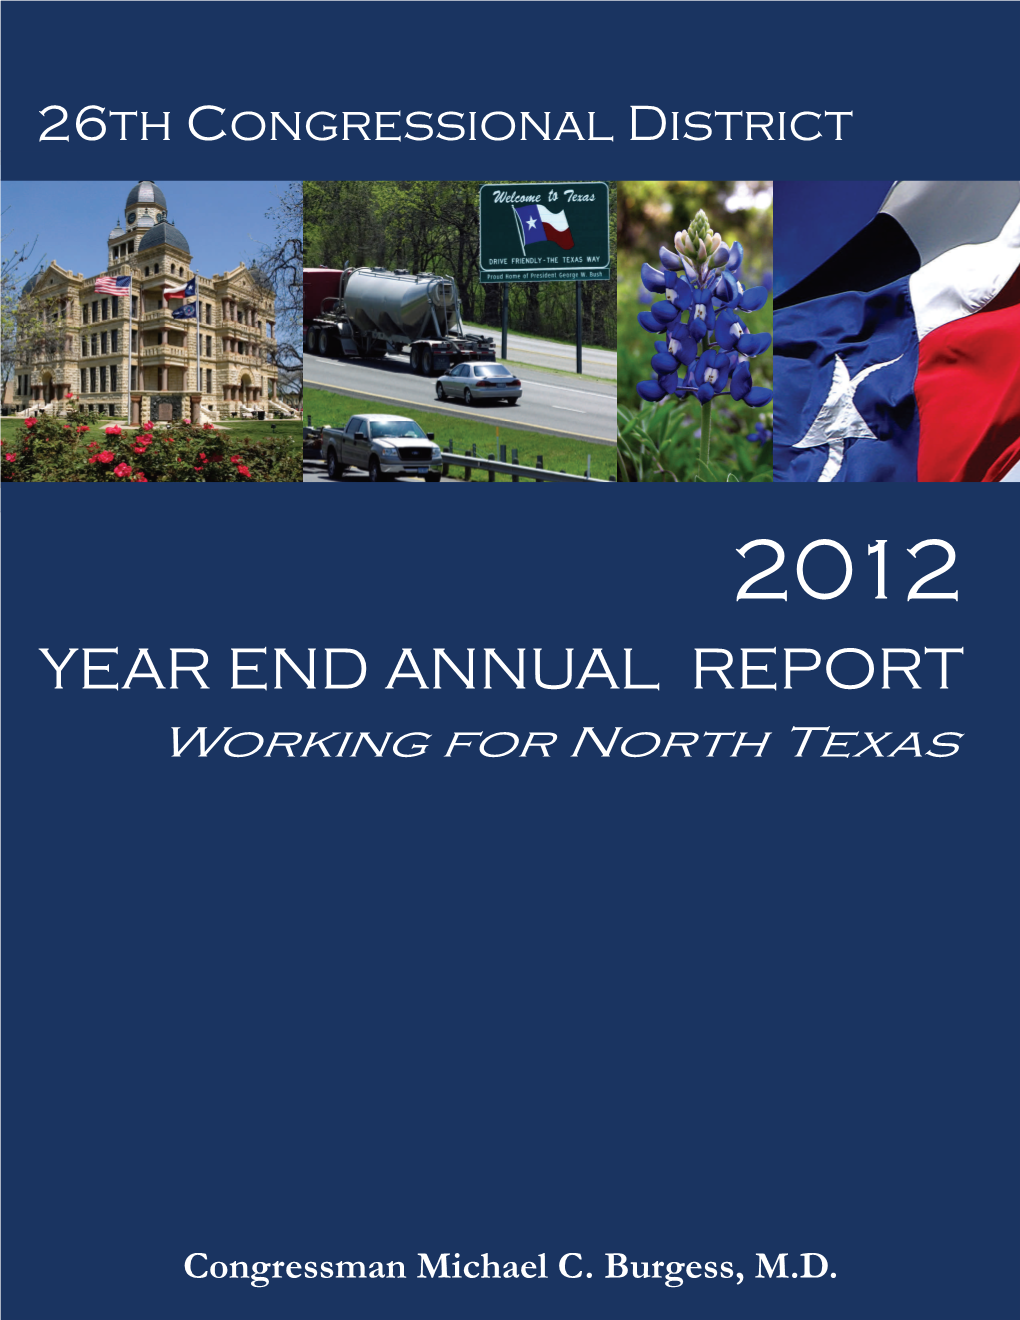 YEAR END ANNUAL REPORT Working for North Texas